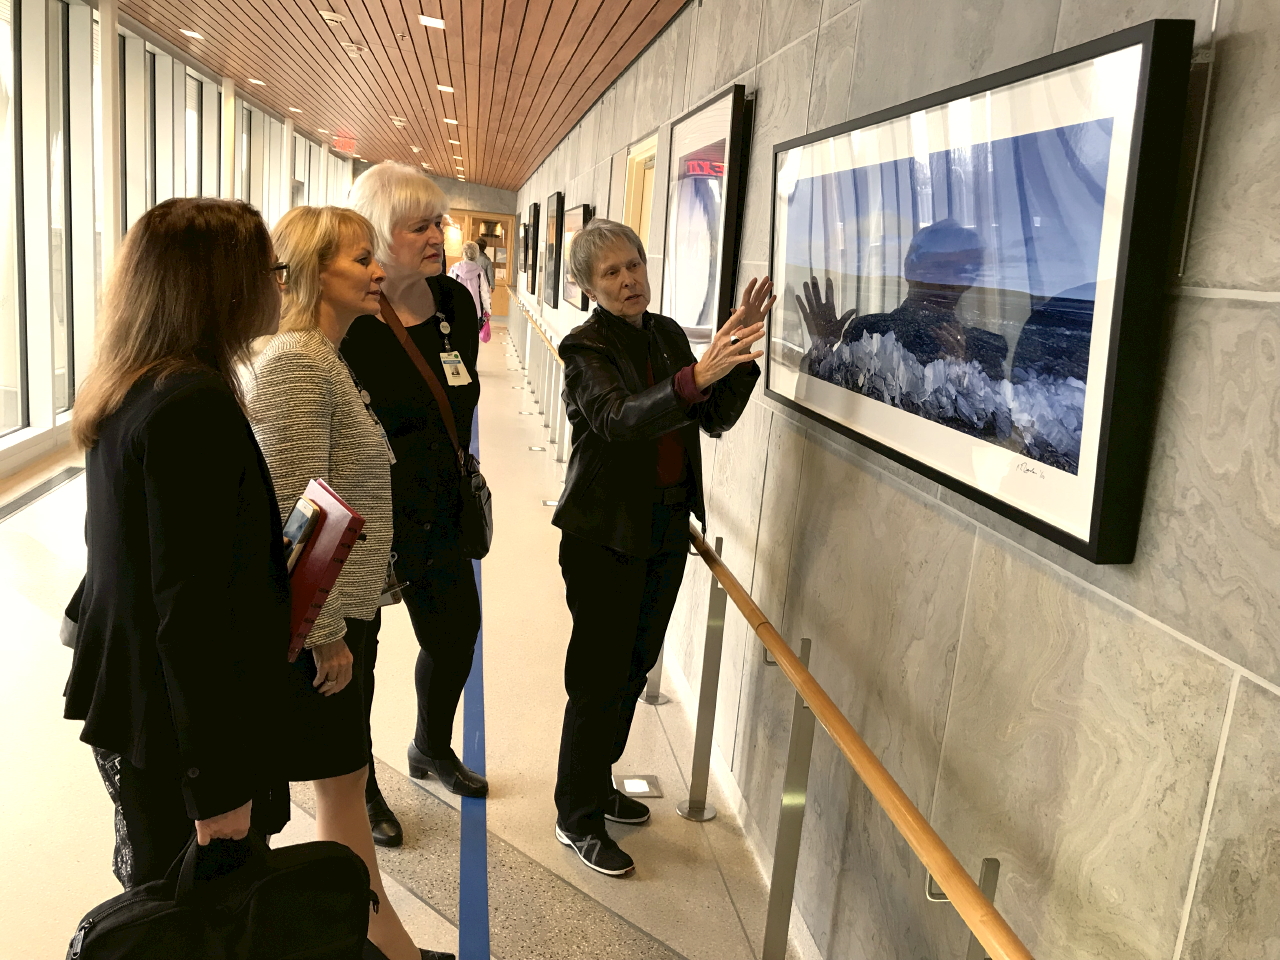 Image of people looking at an image in a gallery